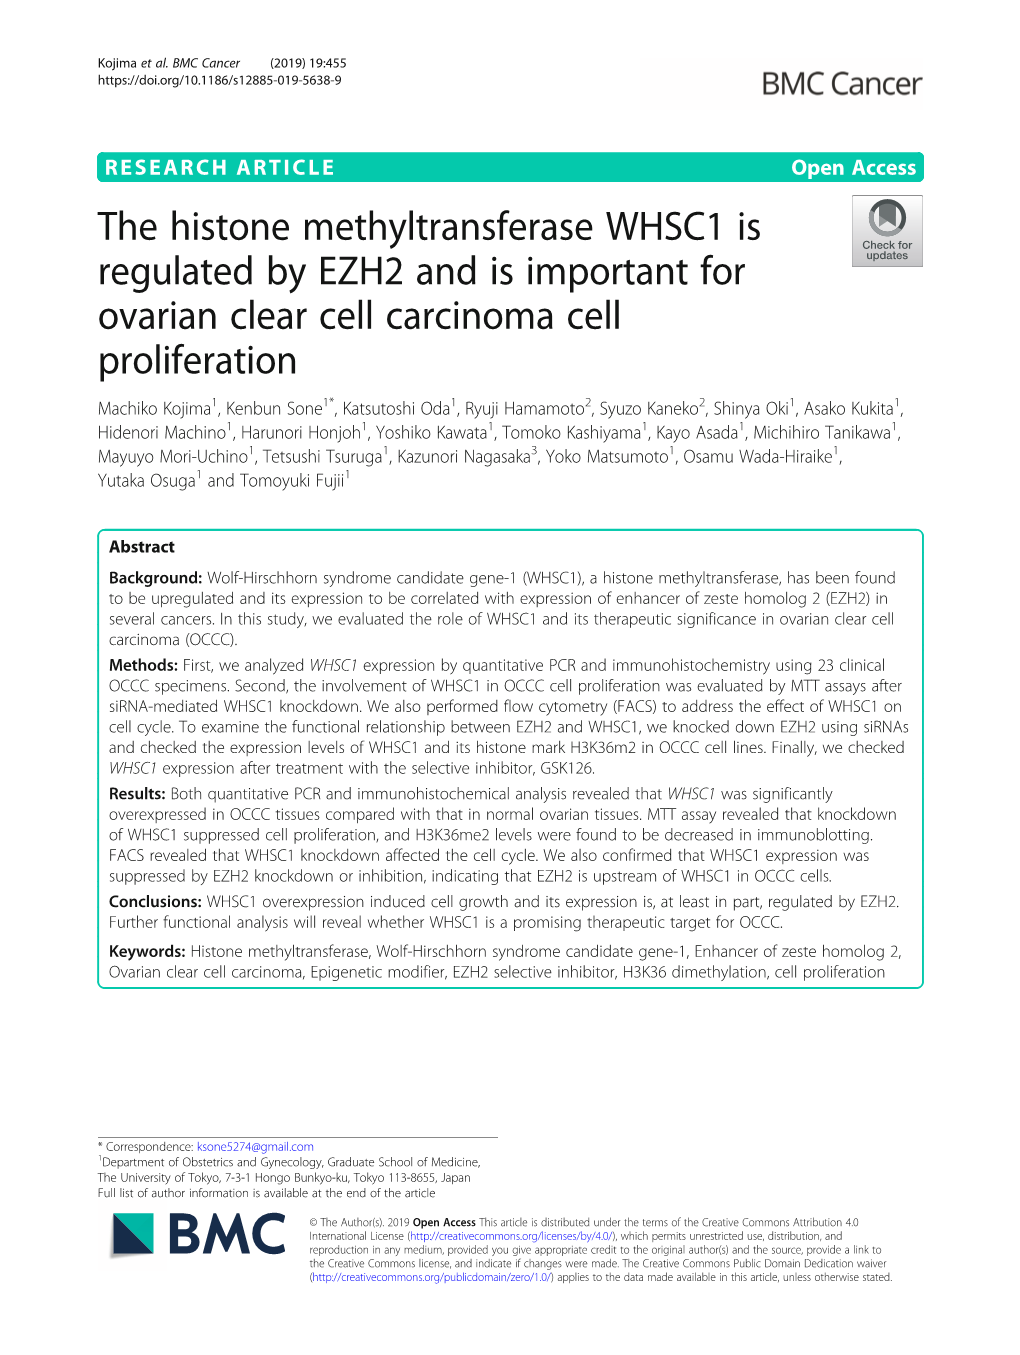 The Histone Methyltransferase WHSC1 Is Regulated by EZH2 and Is Important for Ovarian Clear Cell Carcinoma Cell Proliferation